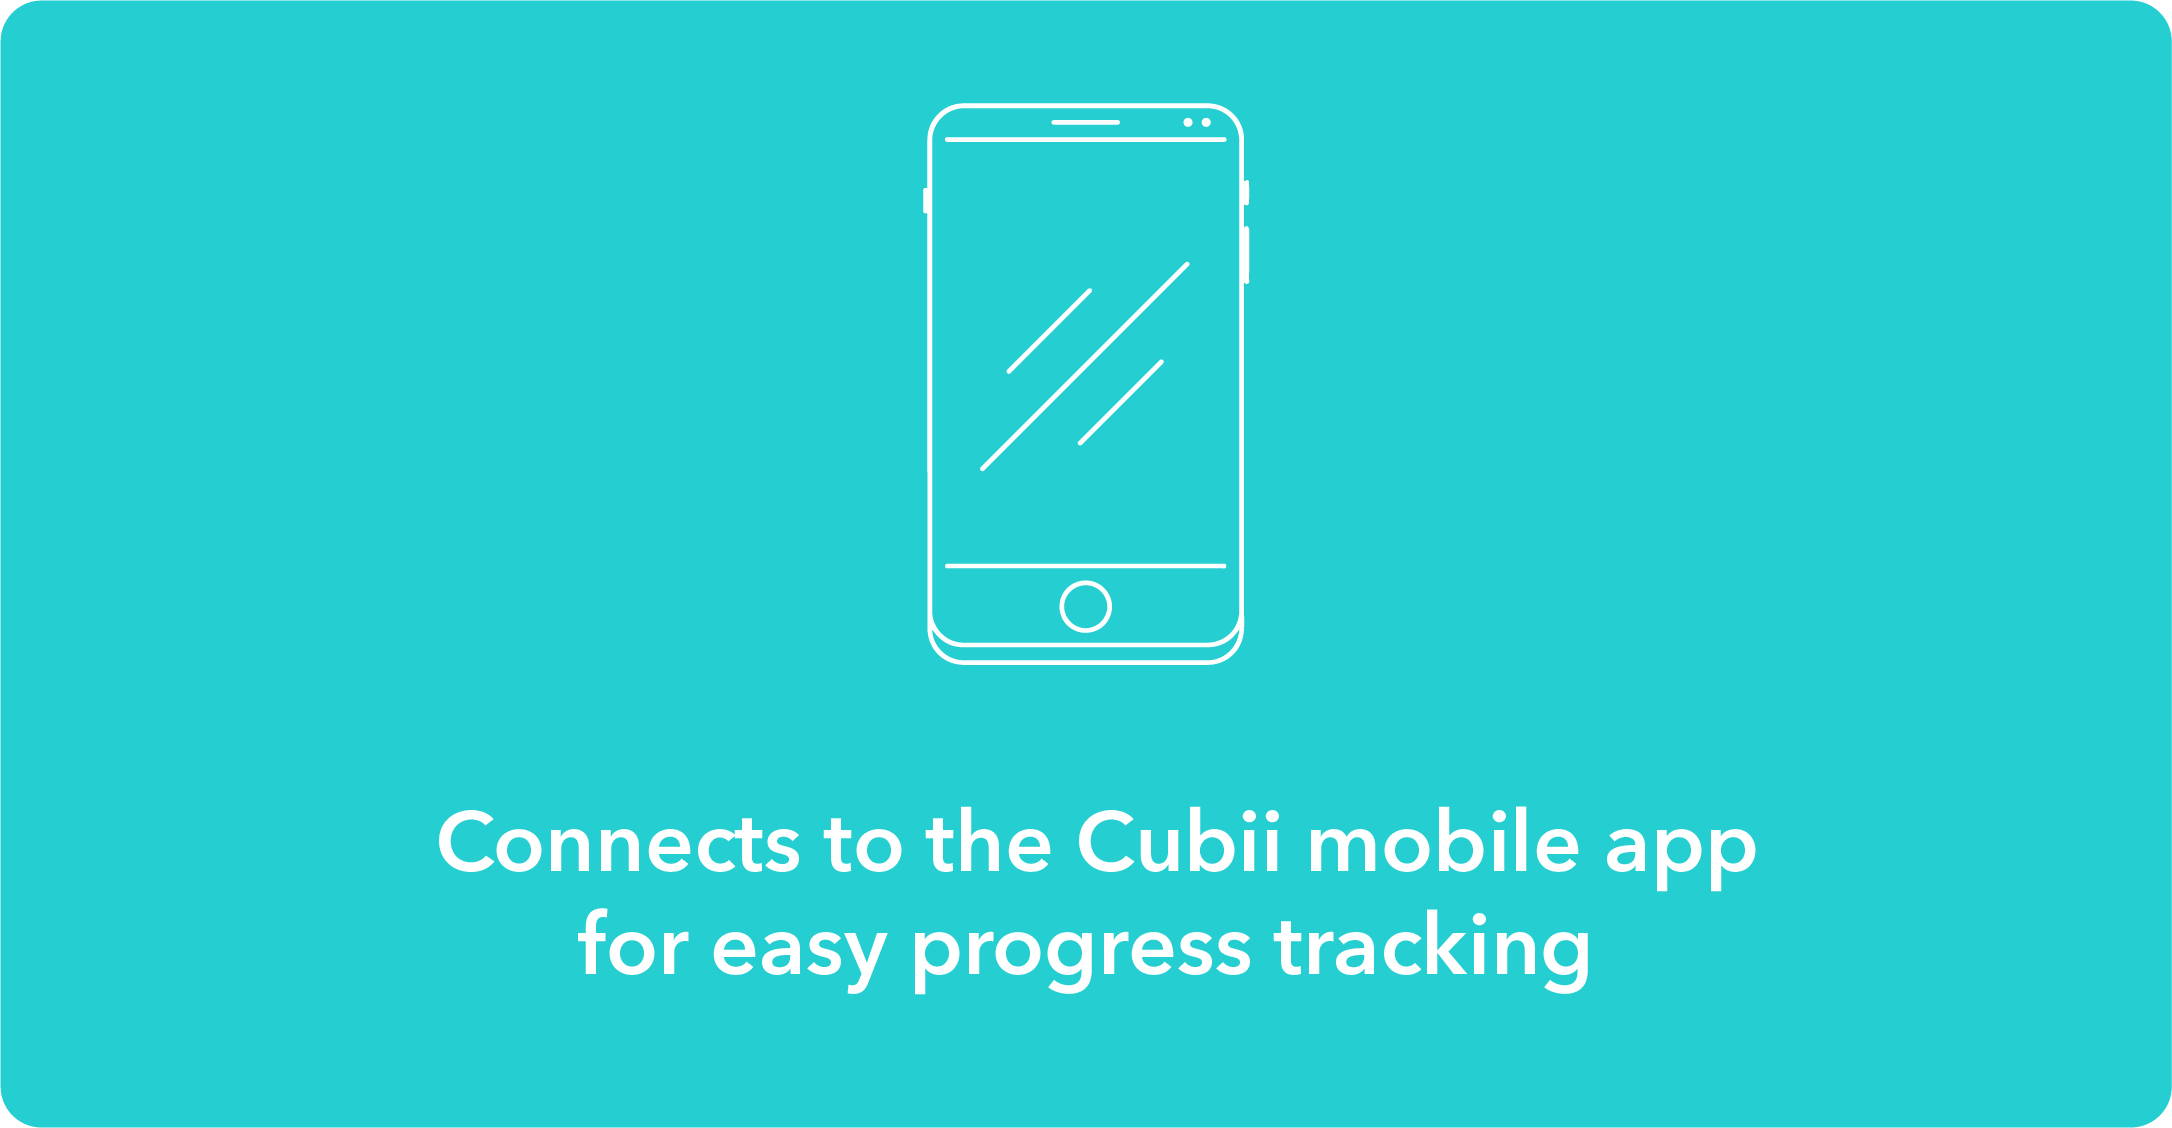 Connects to the Cubii mobile app for easy progress tracking